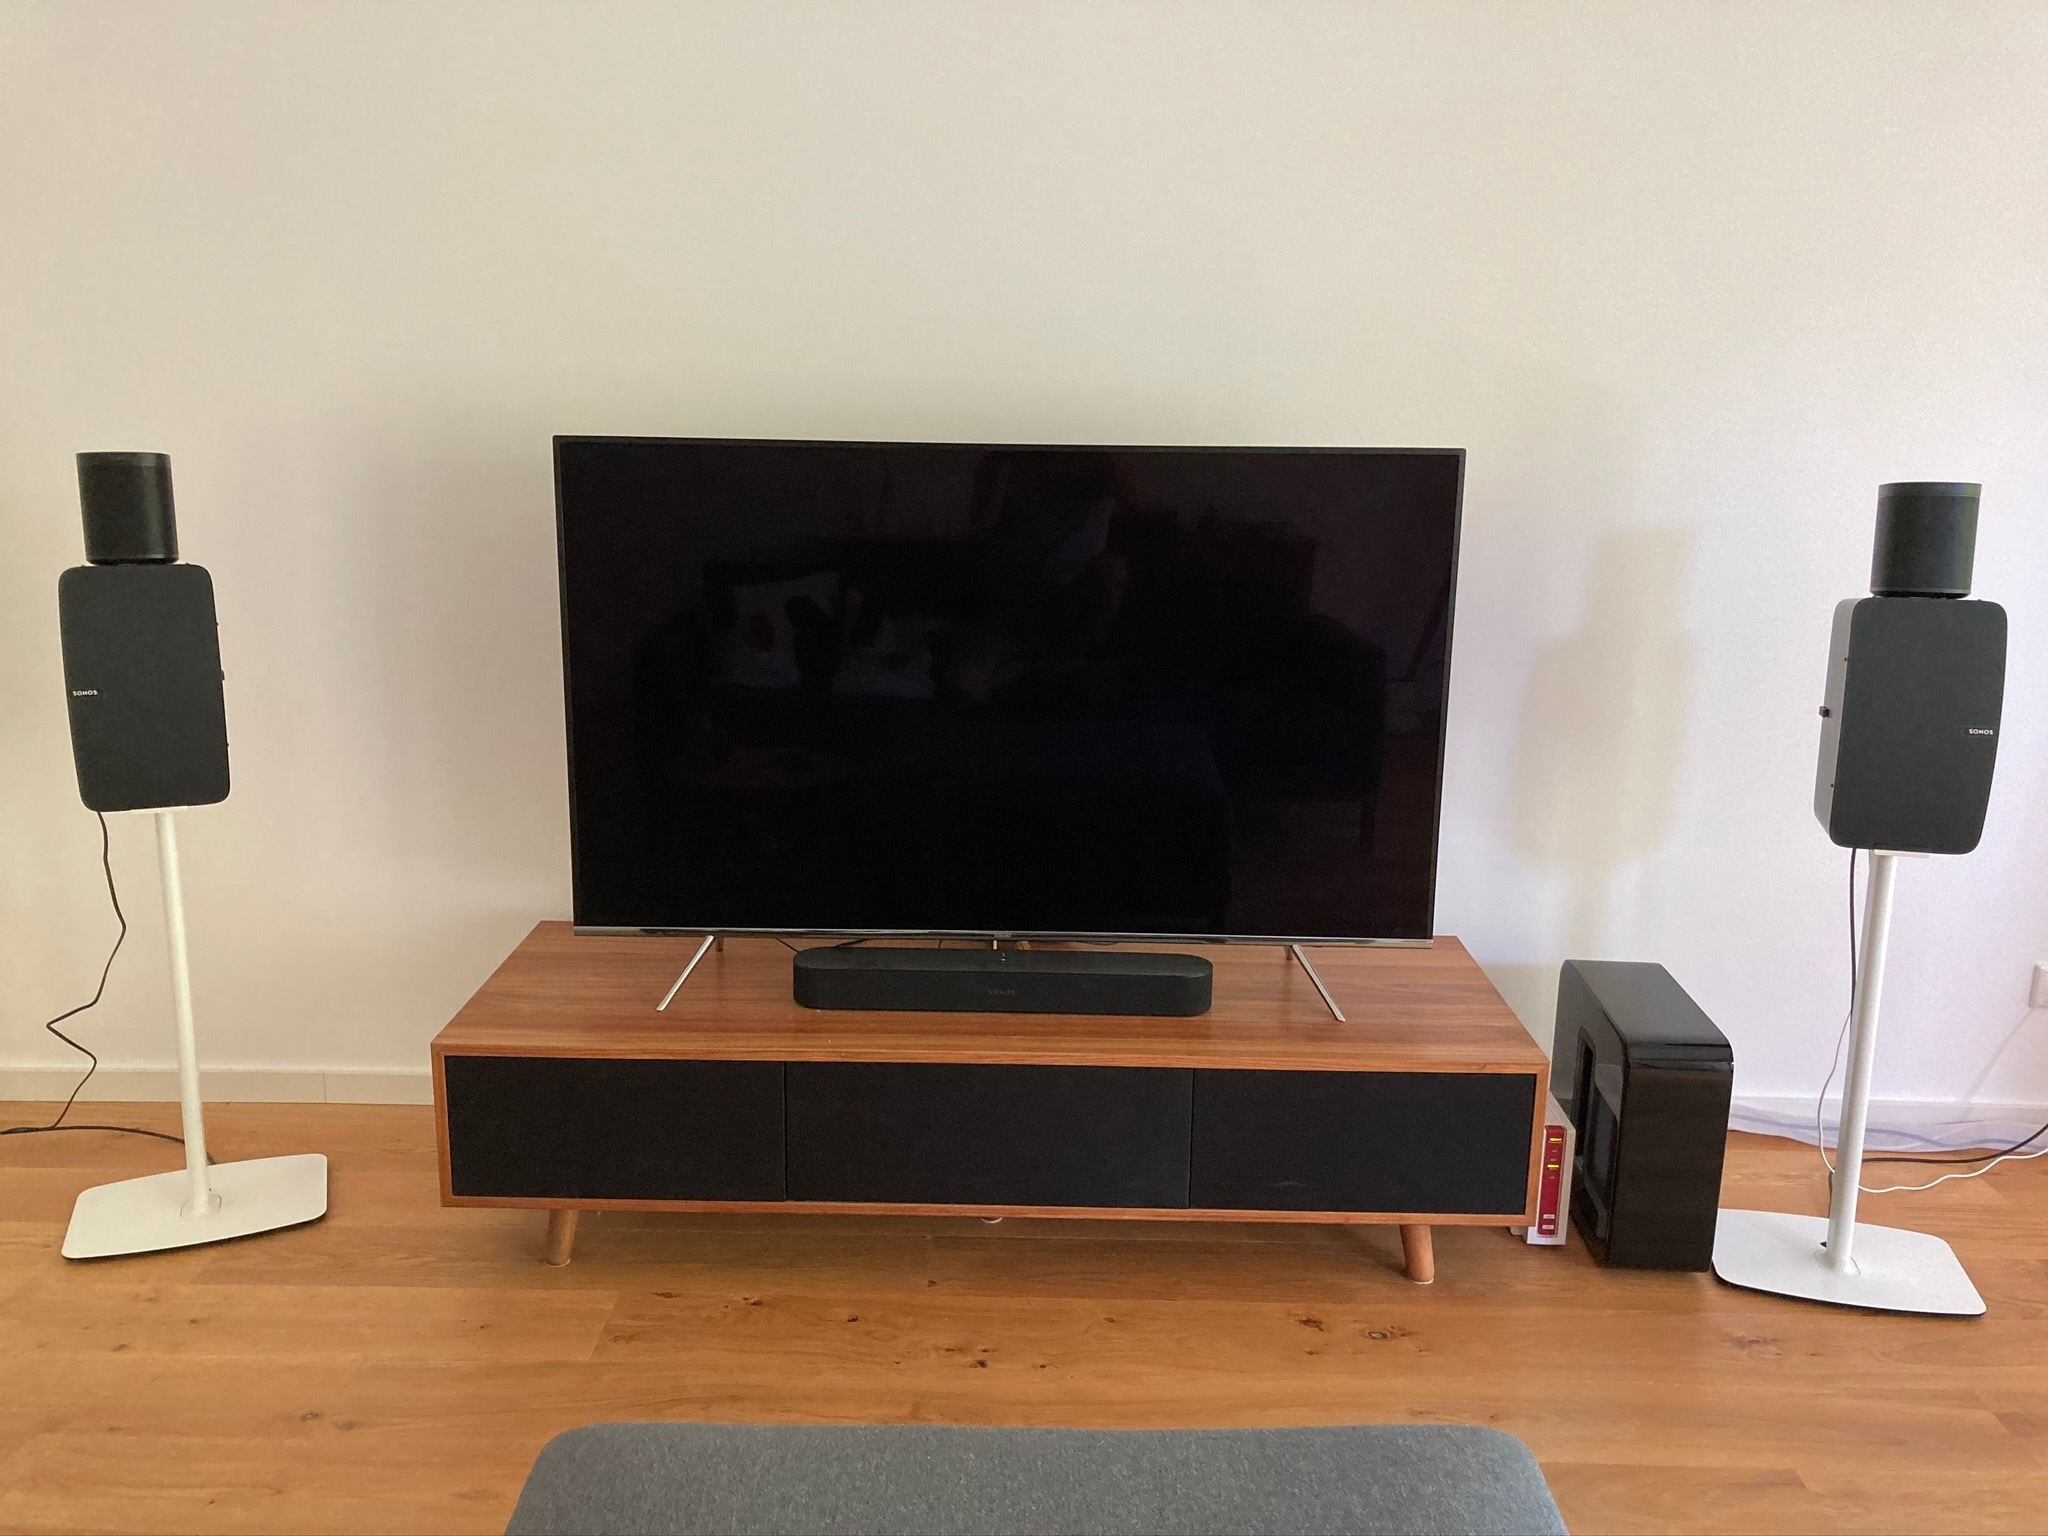 Sub with stereo pair of Ones much different Sub with stereo pair of Fives 5s)? | Sonos Community